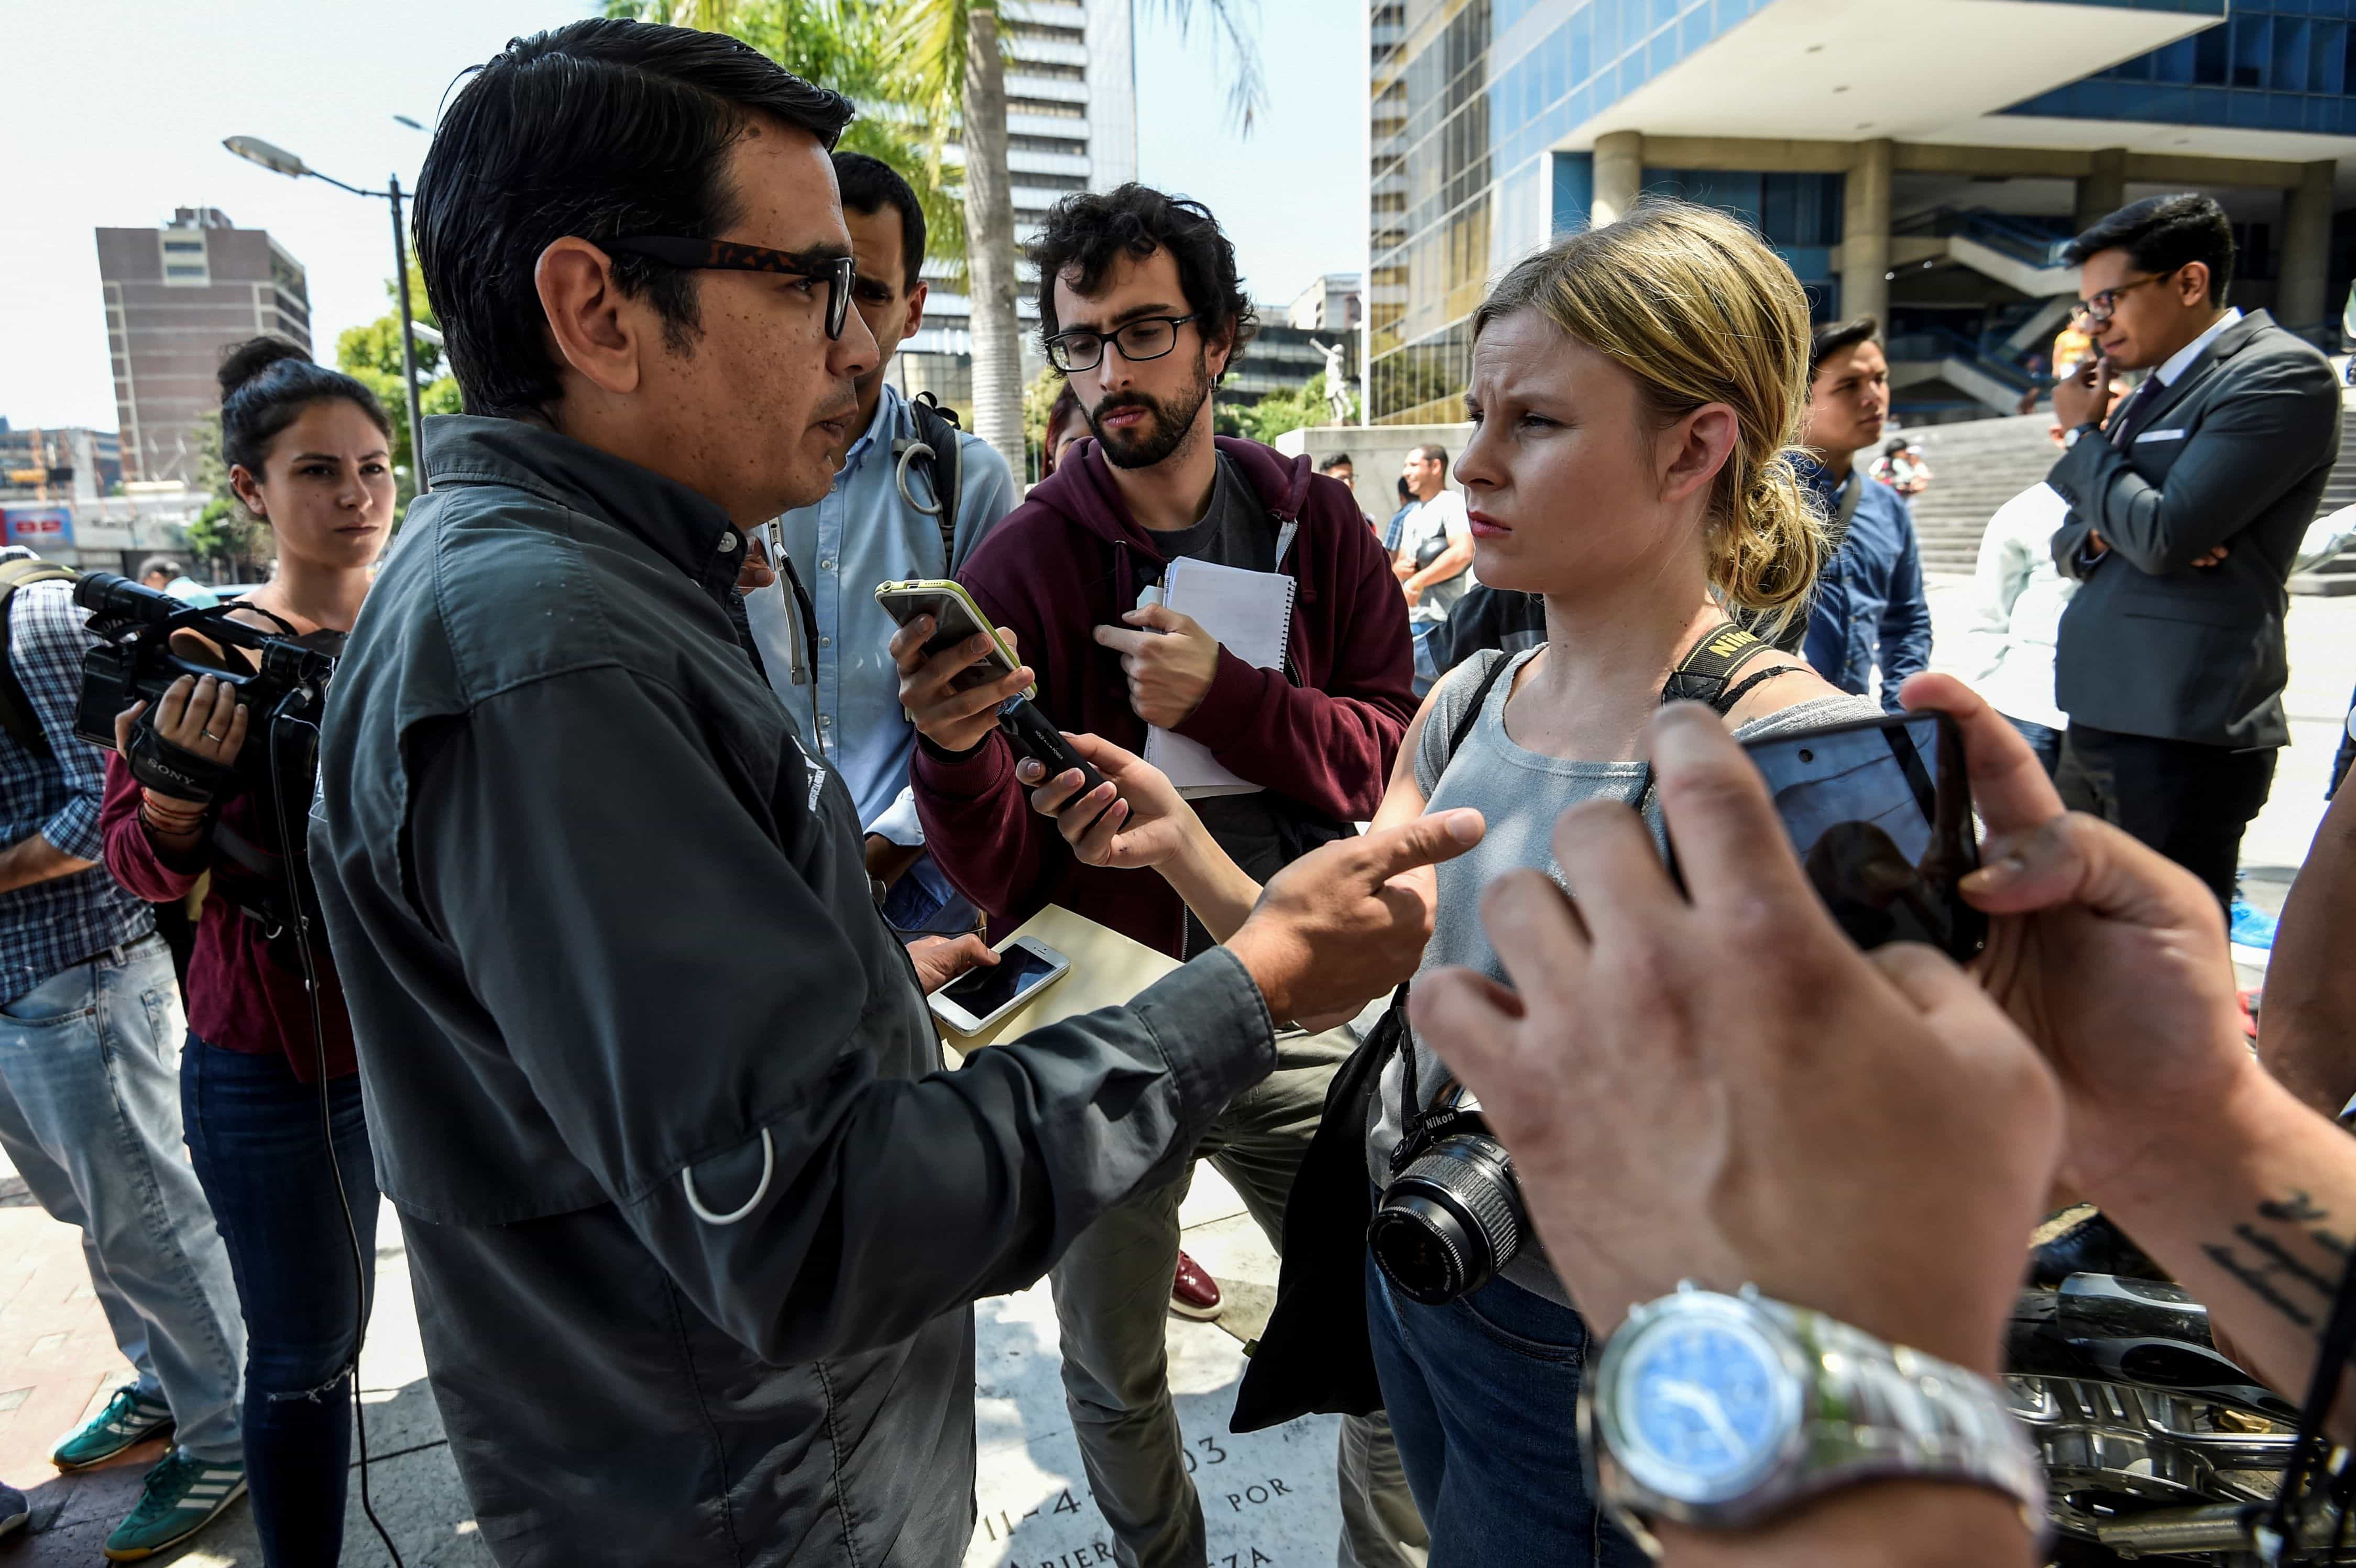 Marcos Ruiz, president of the Venezuelan National Press Union, talks to the media in Caracas, after the release of five foreign journalists detained by Venezuelan authorities, on January 31, 2019, JUAN BARRETO/AFP/Getty Images